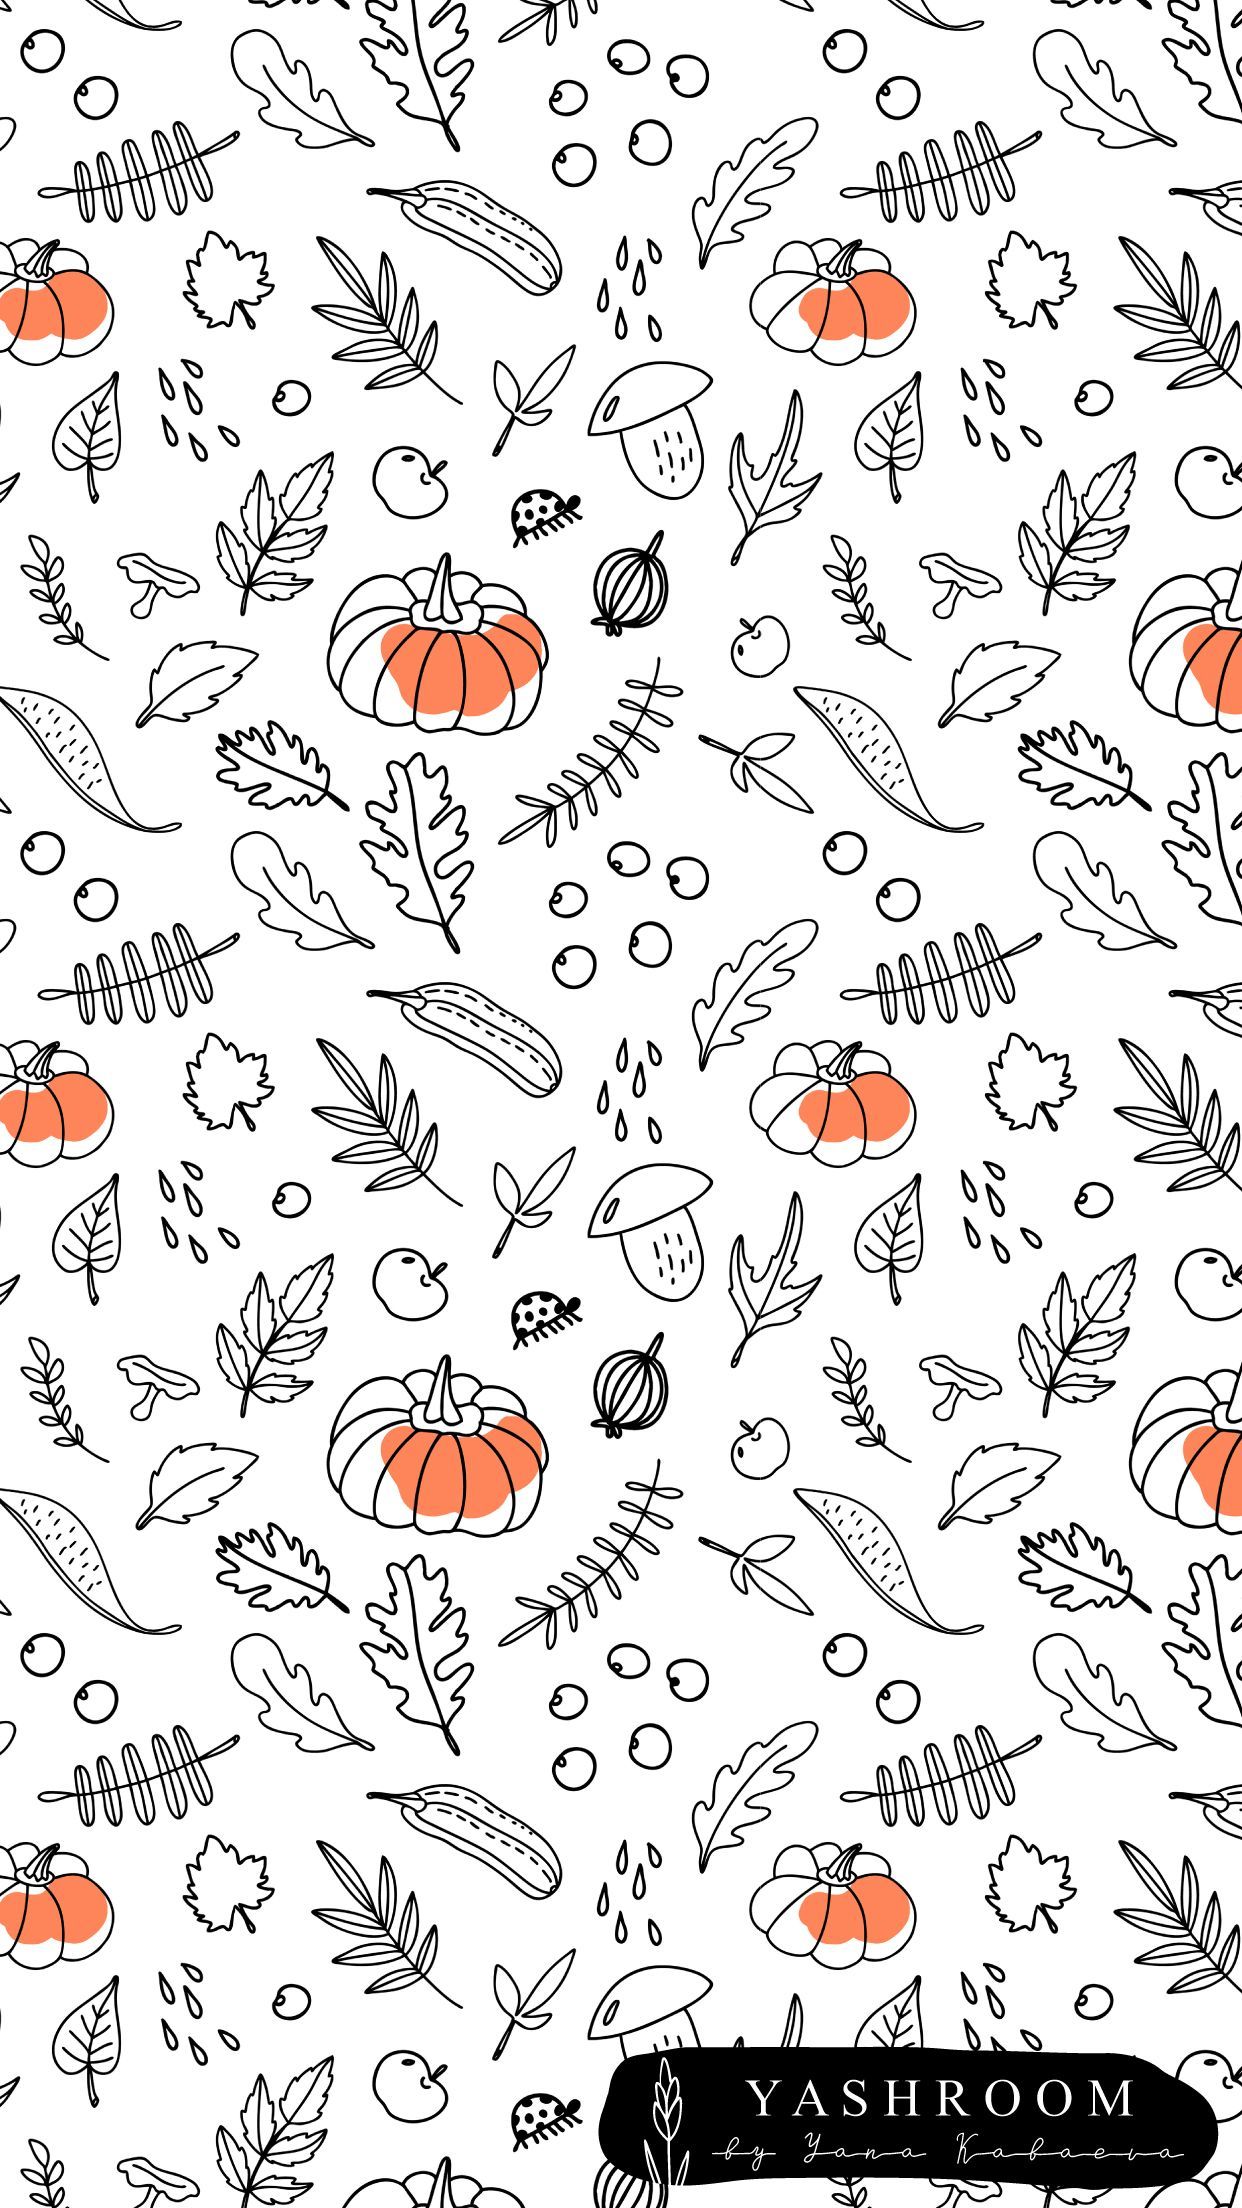 Colorful fabrics digitally printed by Spoonflower - autumn pumpkin - Colorful fabrics digitally printed by Spoonflower - autumn pumpkin -   16 thanksgiving wallpapers aesthetic ideas